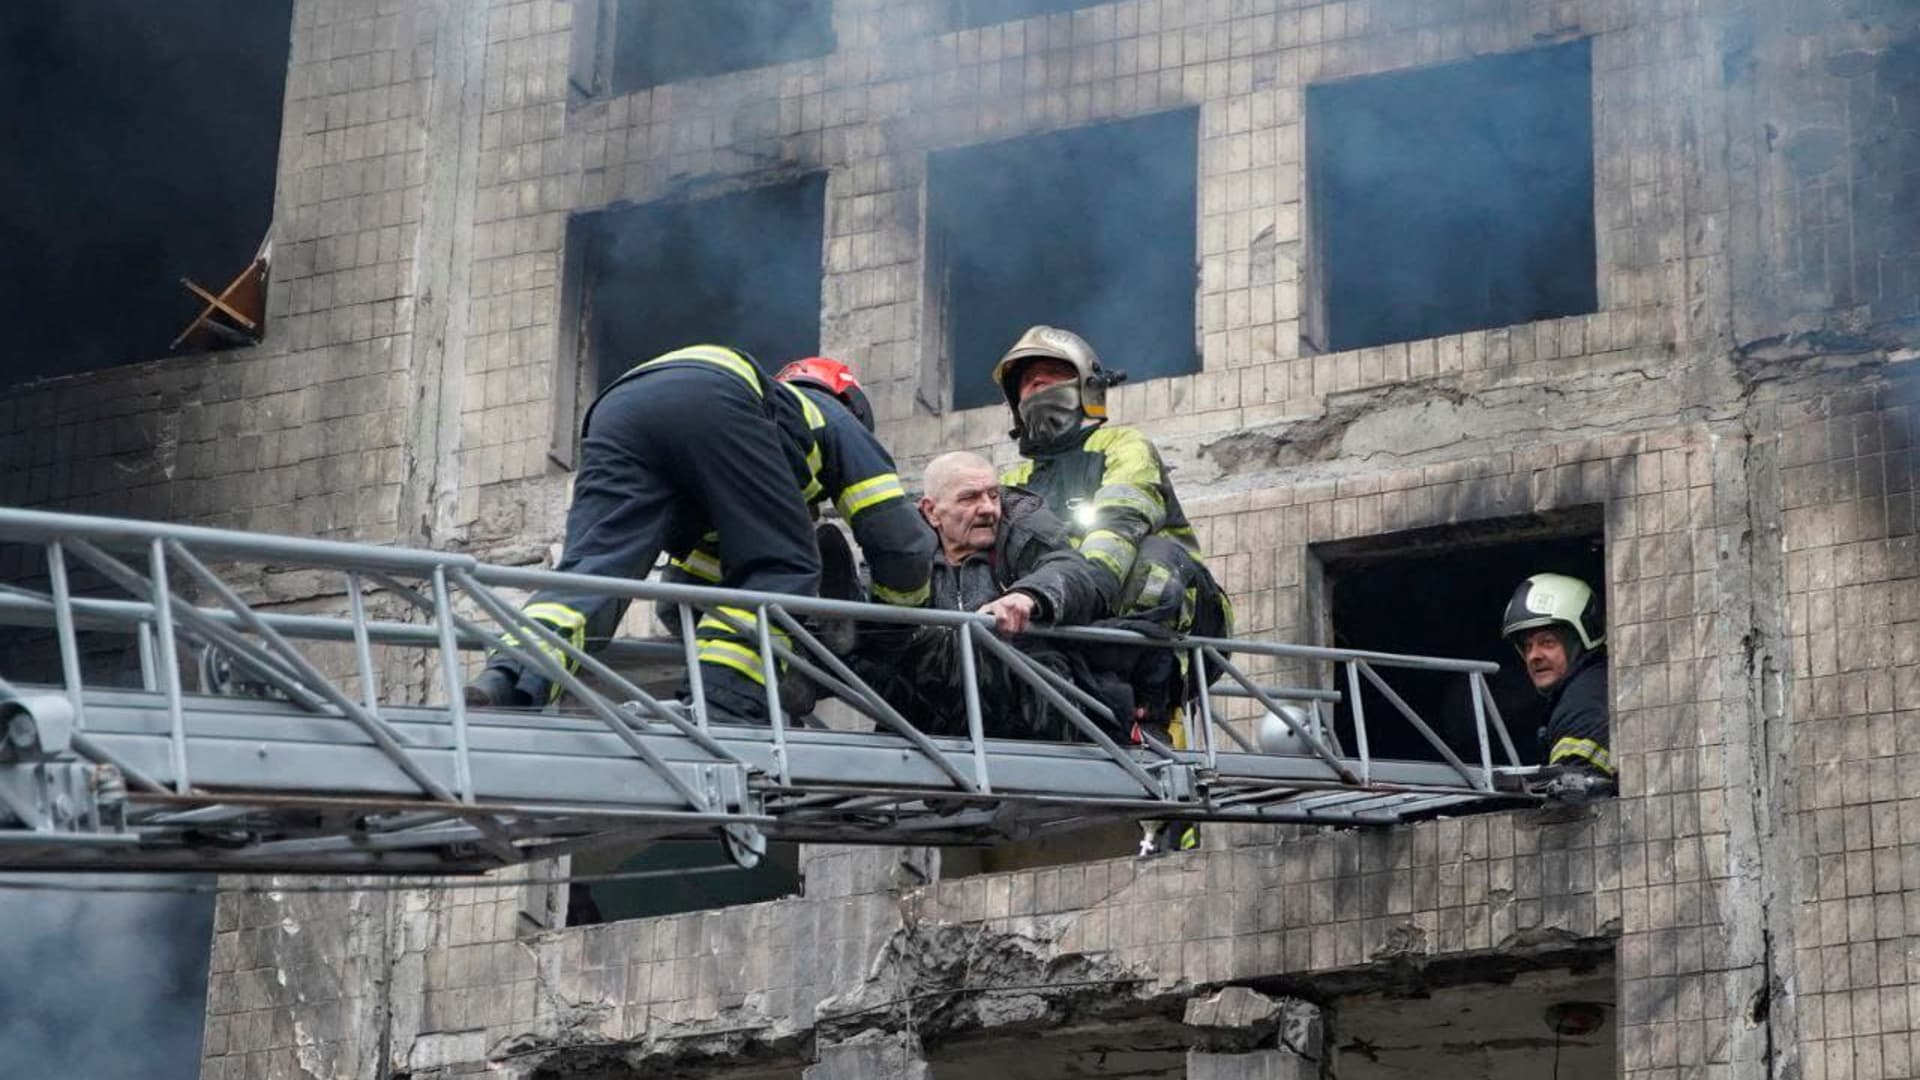 Firefighters use a ladder to evacuate a man from a residential building that was struck, as Russia's attack on Ukraine continues, in Kyiv, Ukraine, in this handout picture released March 14, 2022. 